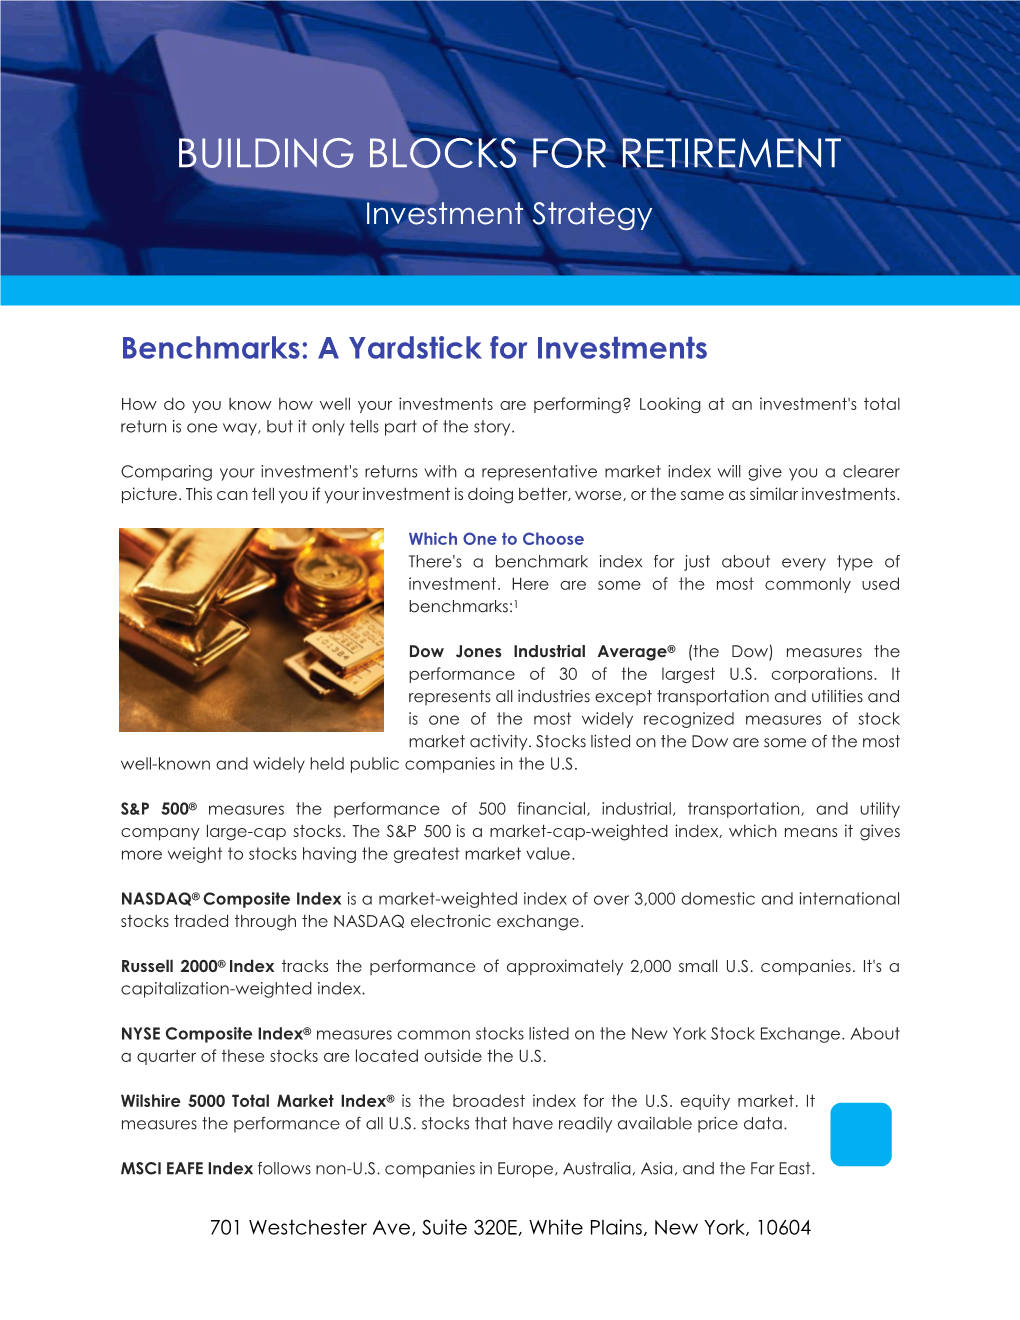 Benchmarks: a Yardstick for Investments